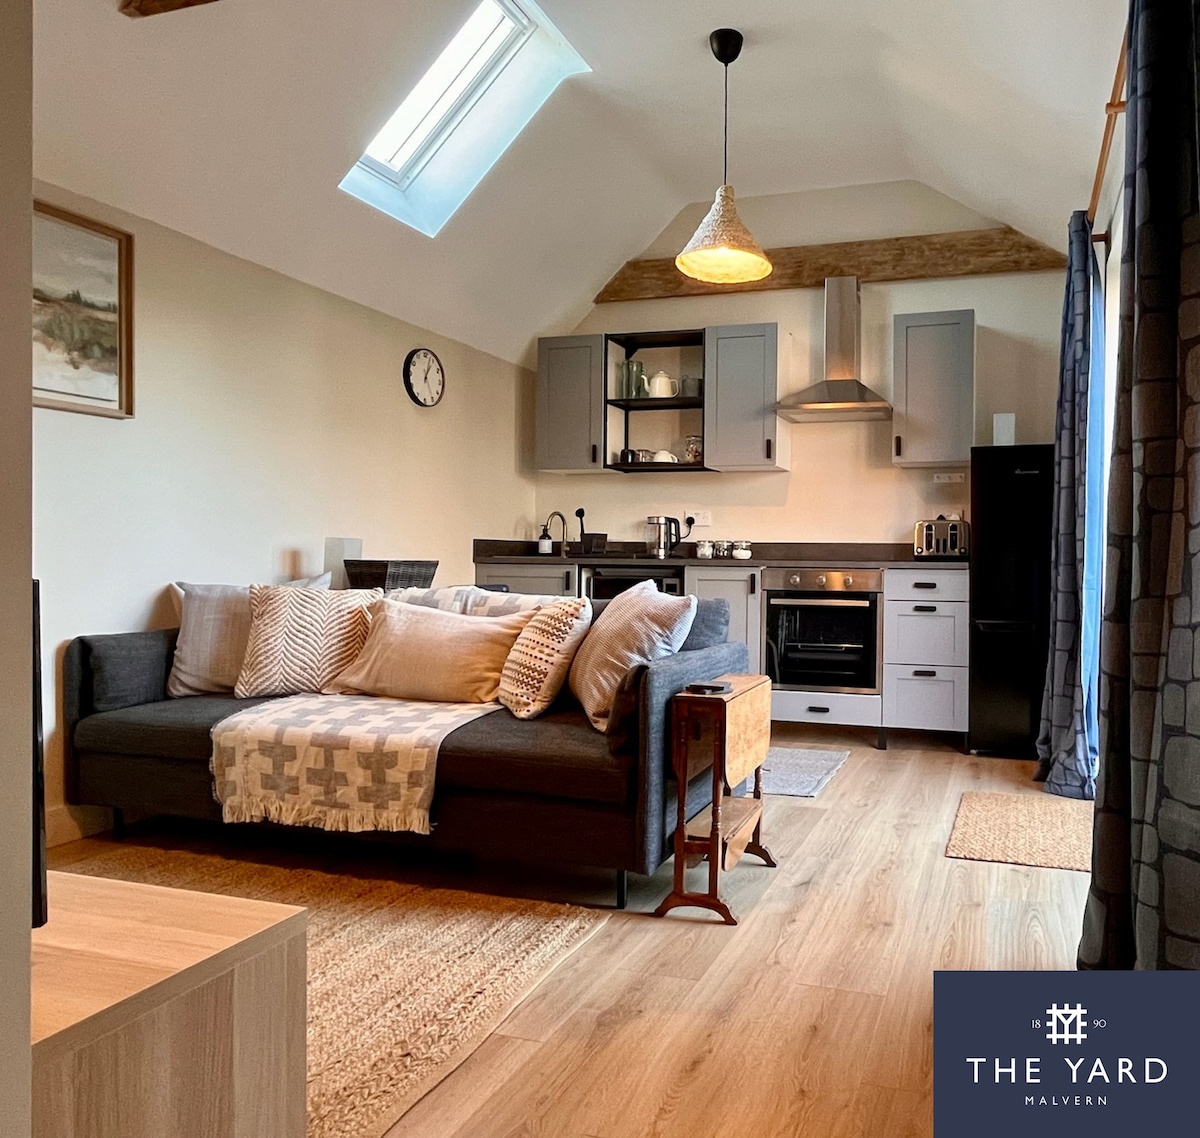 The Yard: Rustic guest house in Malvern